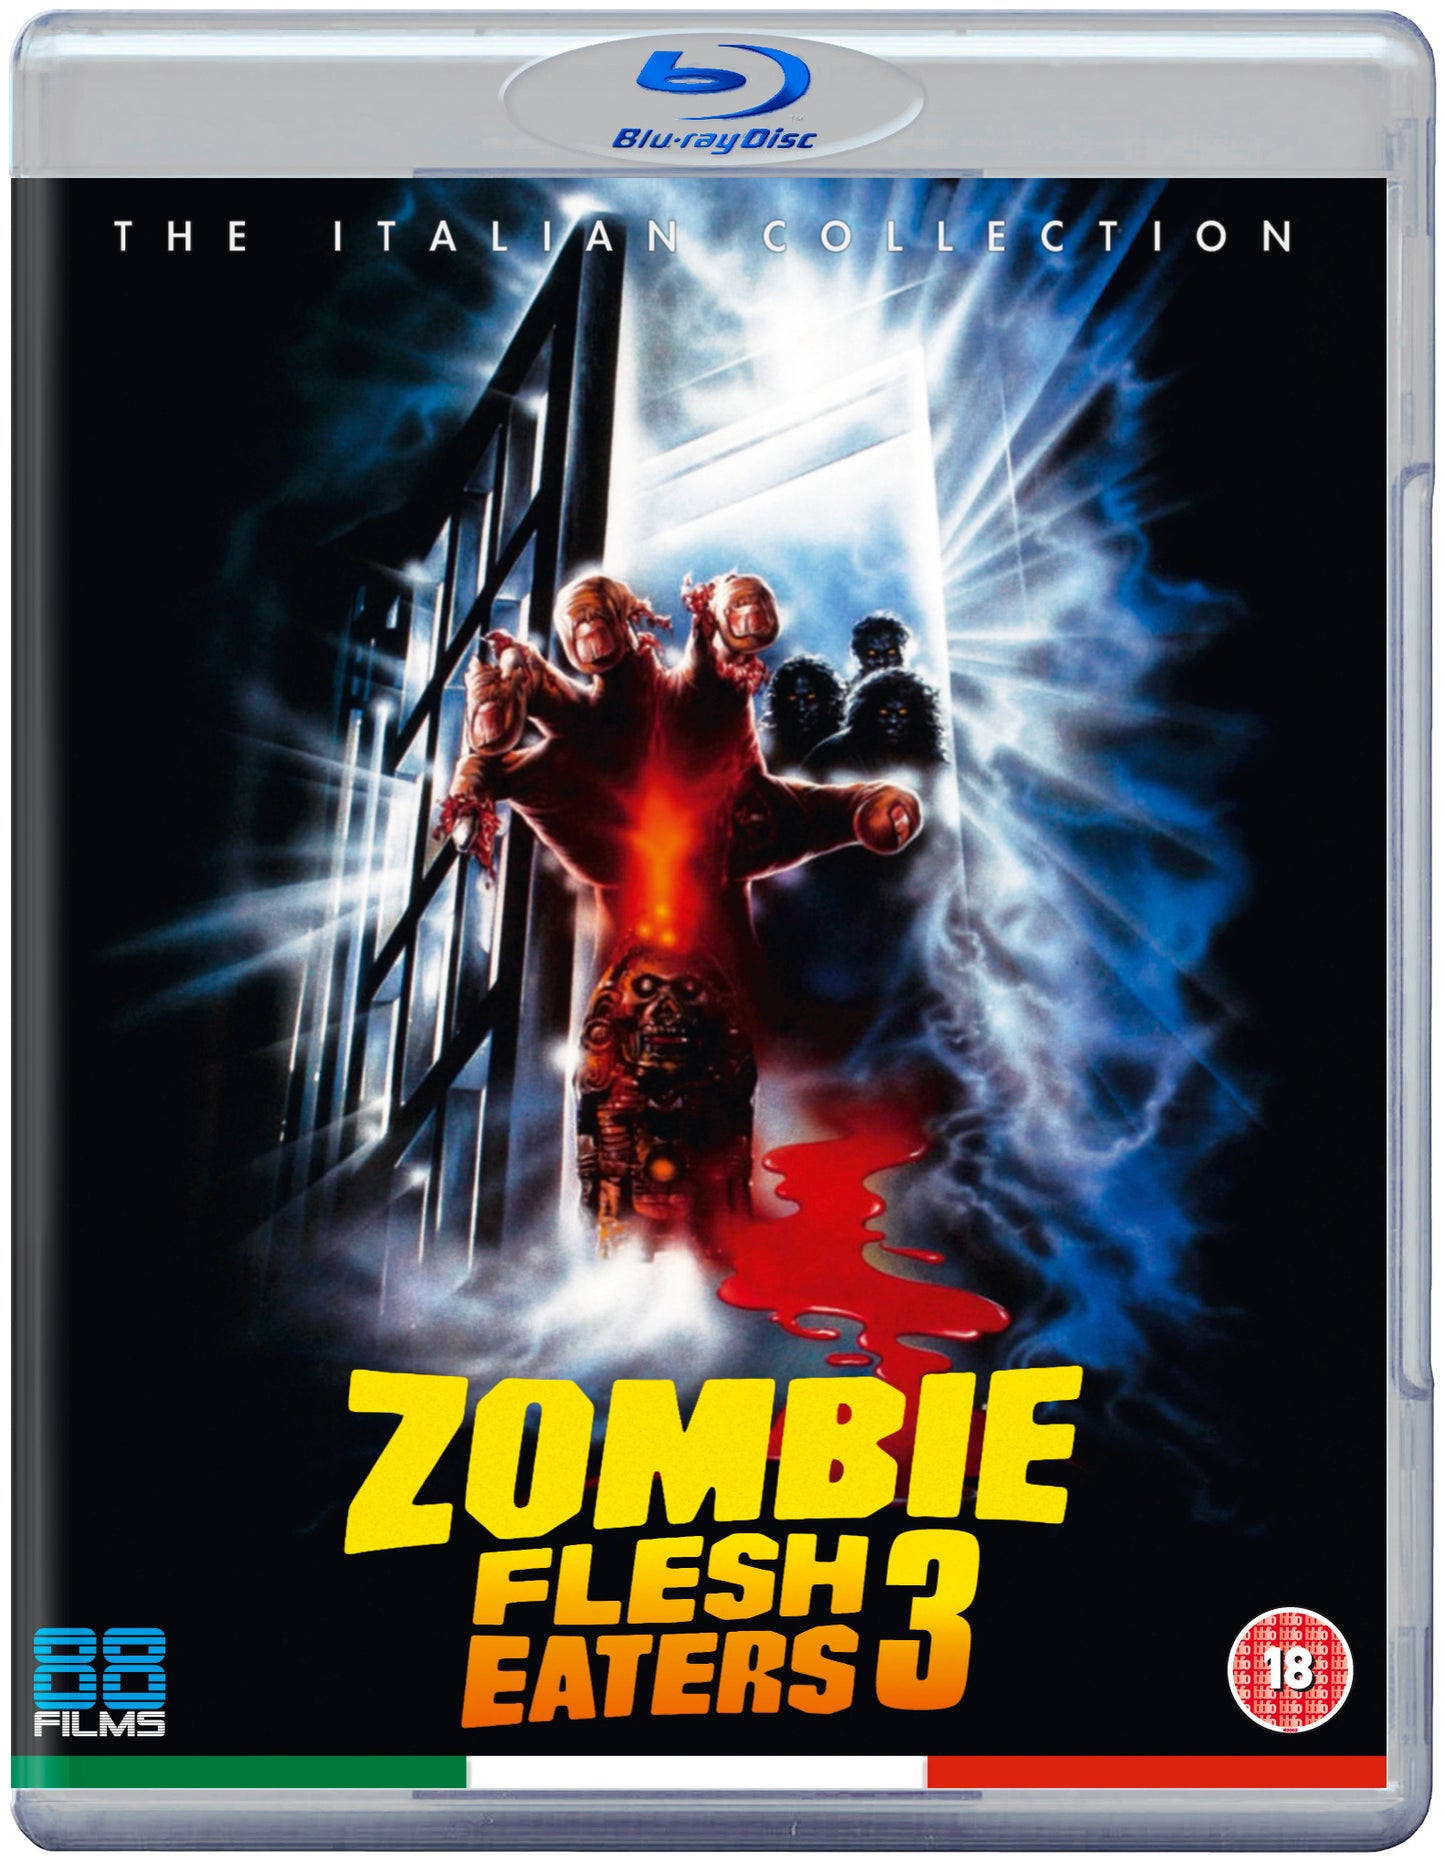 Zombie Flesh Eaters 3 - The Italian Collection 47